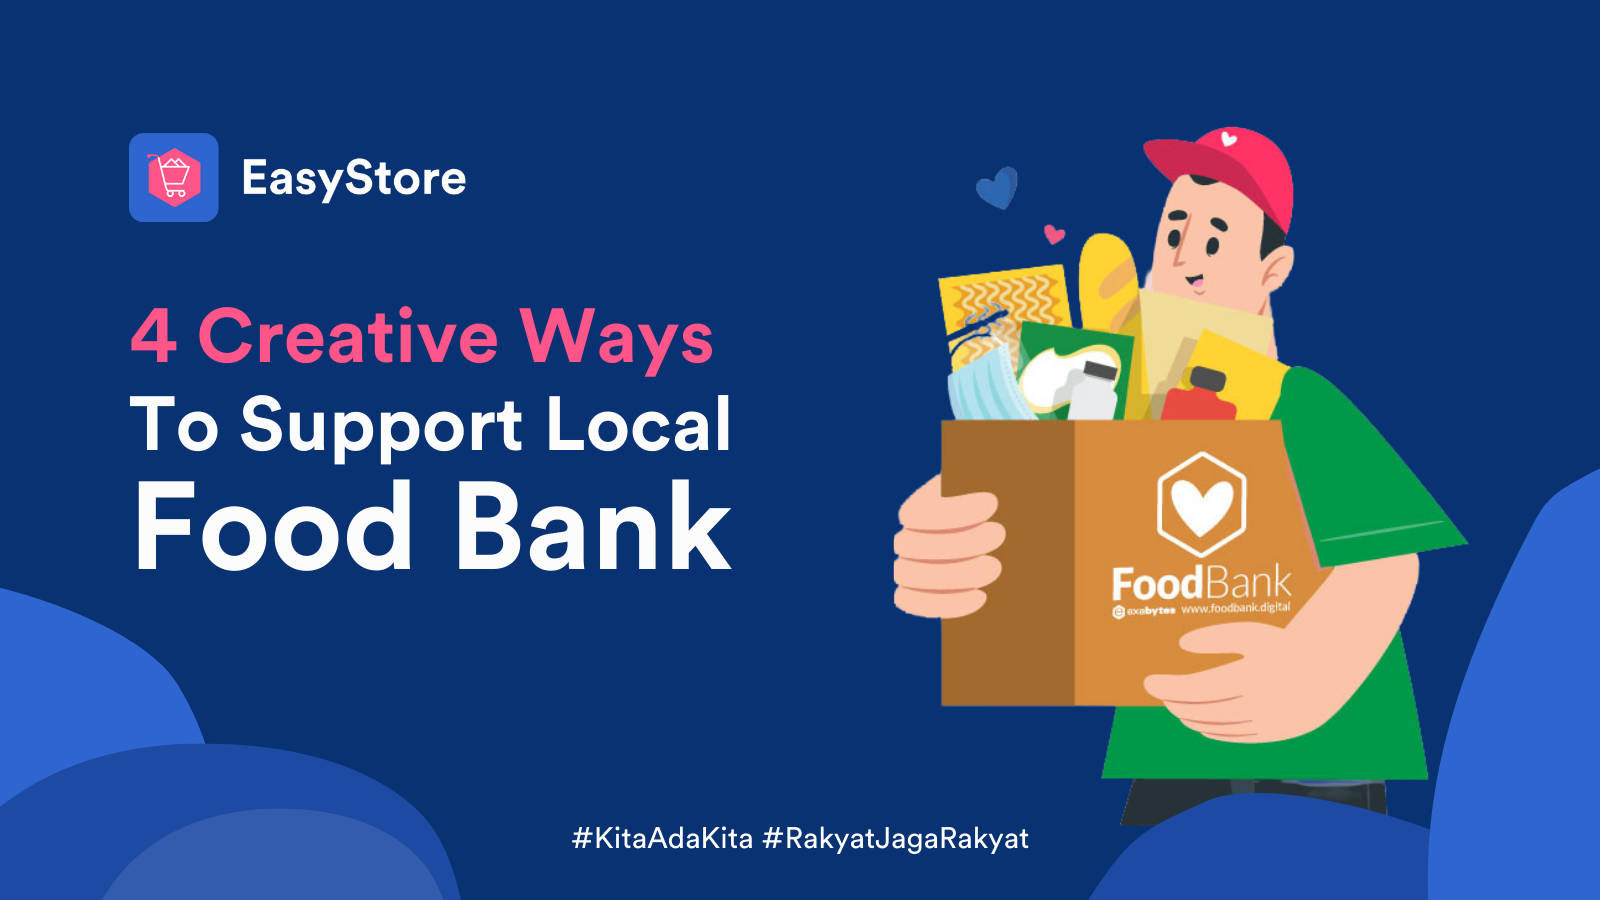 4 Creative Ways To Support Local Food Bank | EasyStore